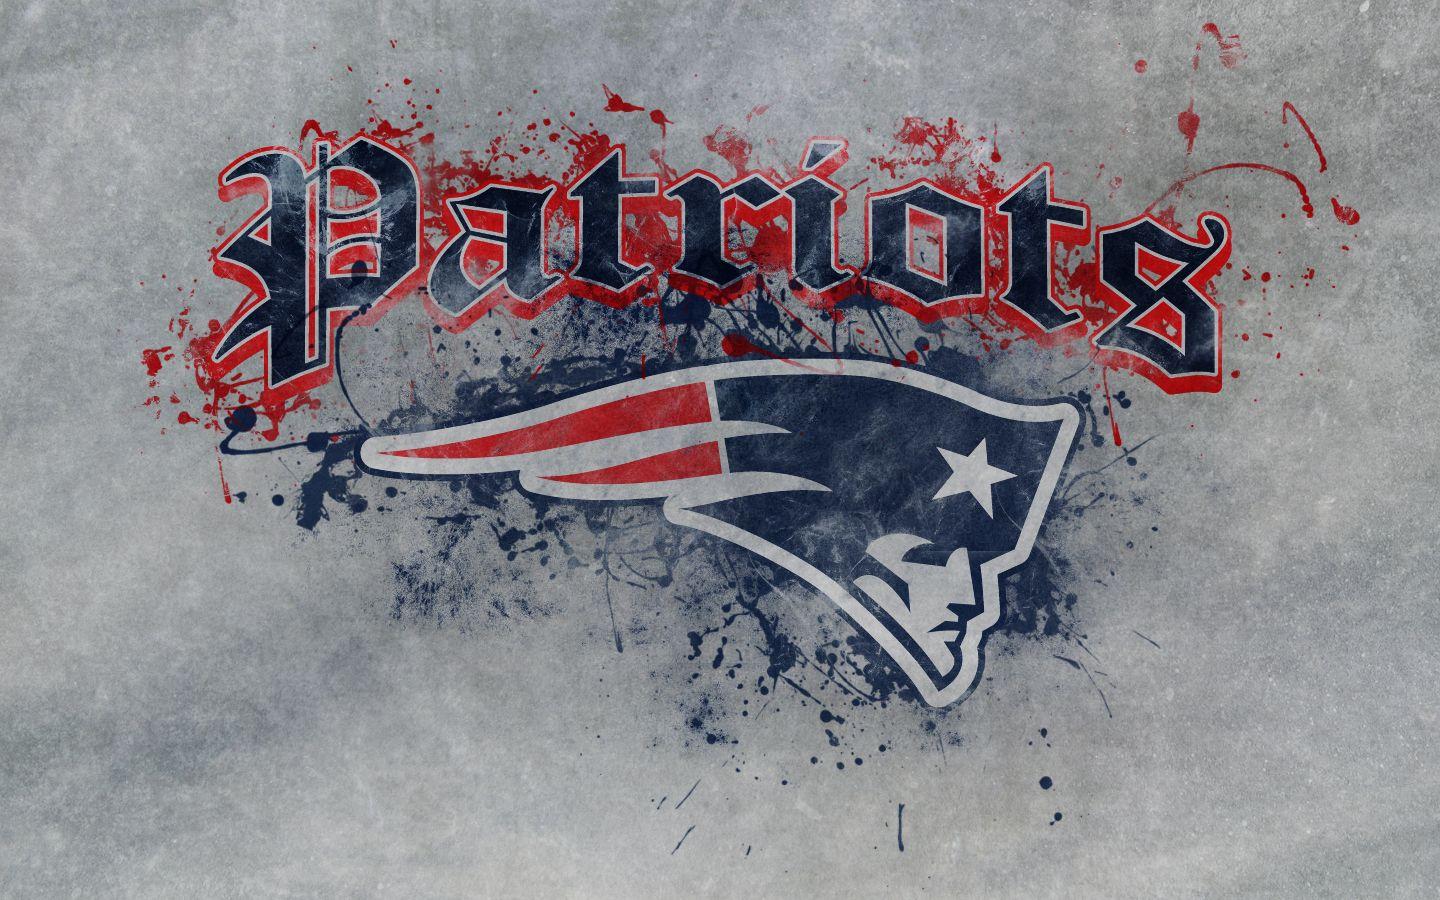 New England Patriots Wallpapers